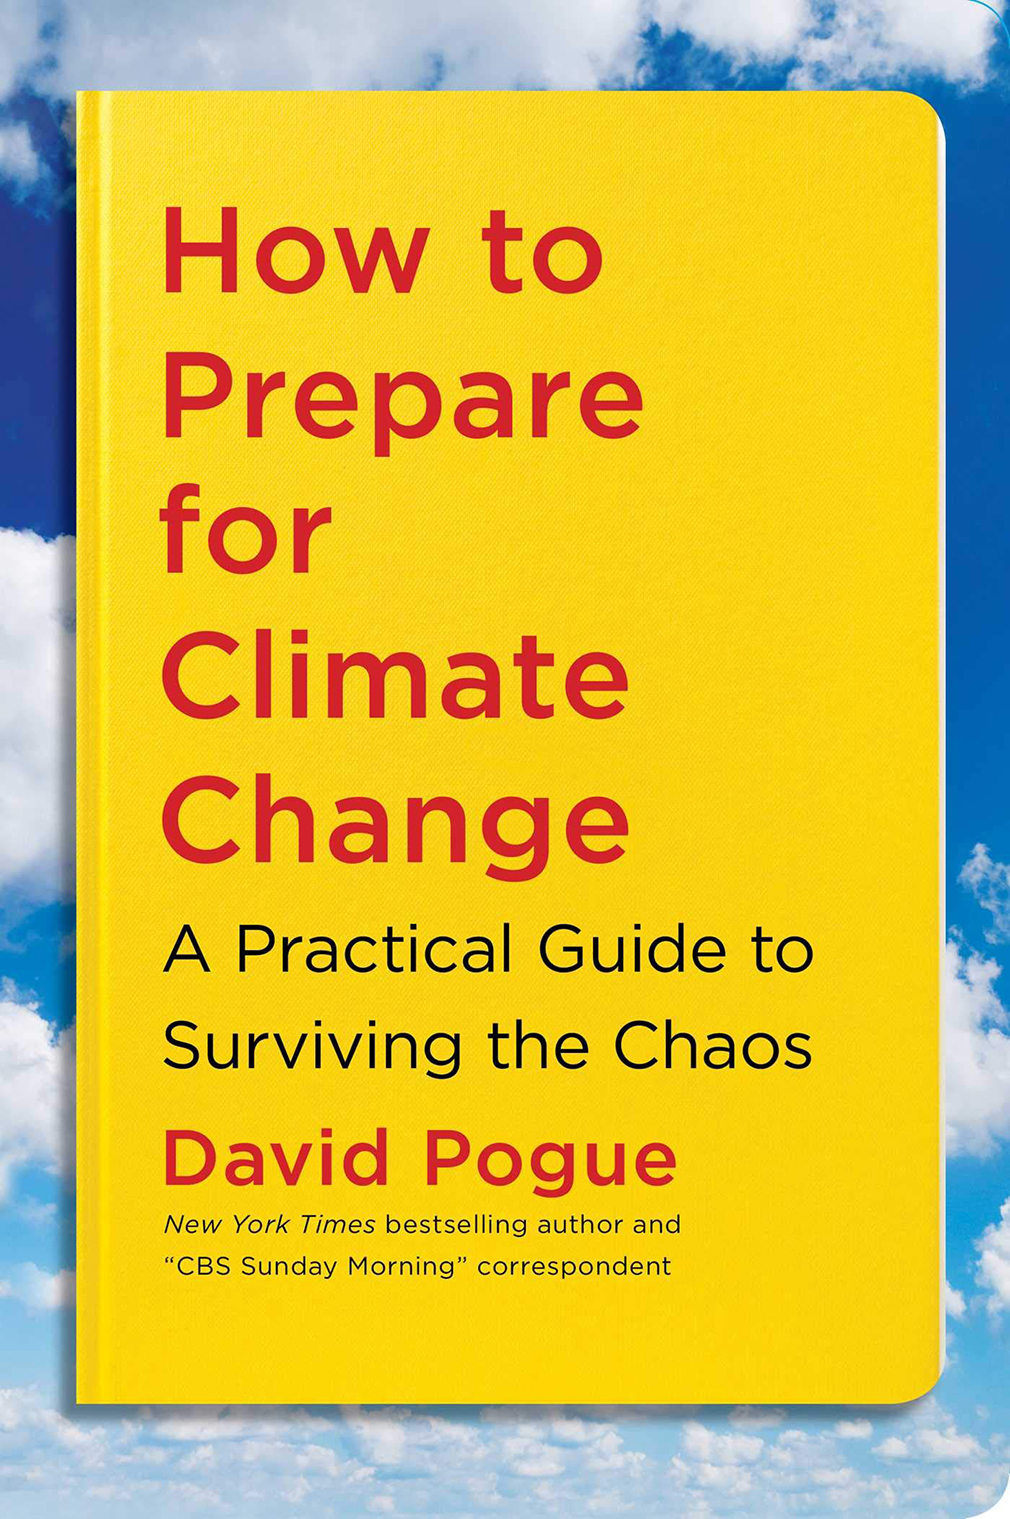 How to Prepare for Climate Change book cover, helping kids cope with climate change